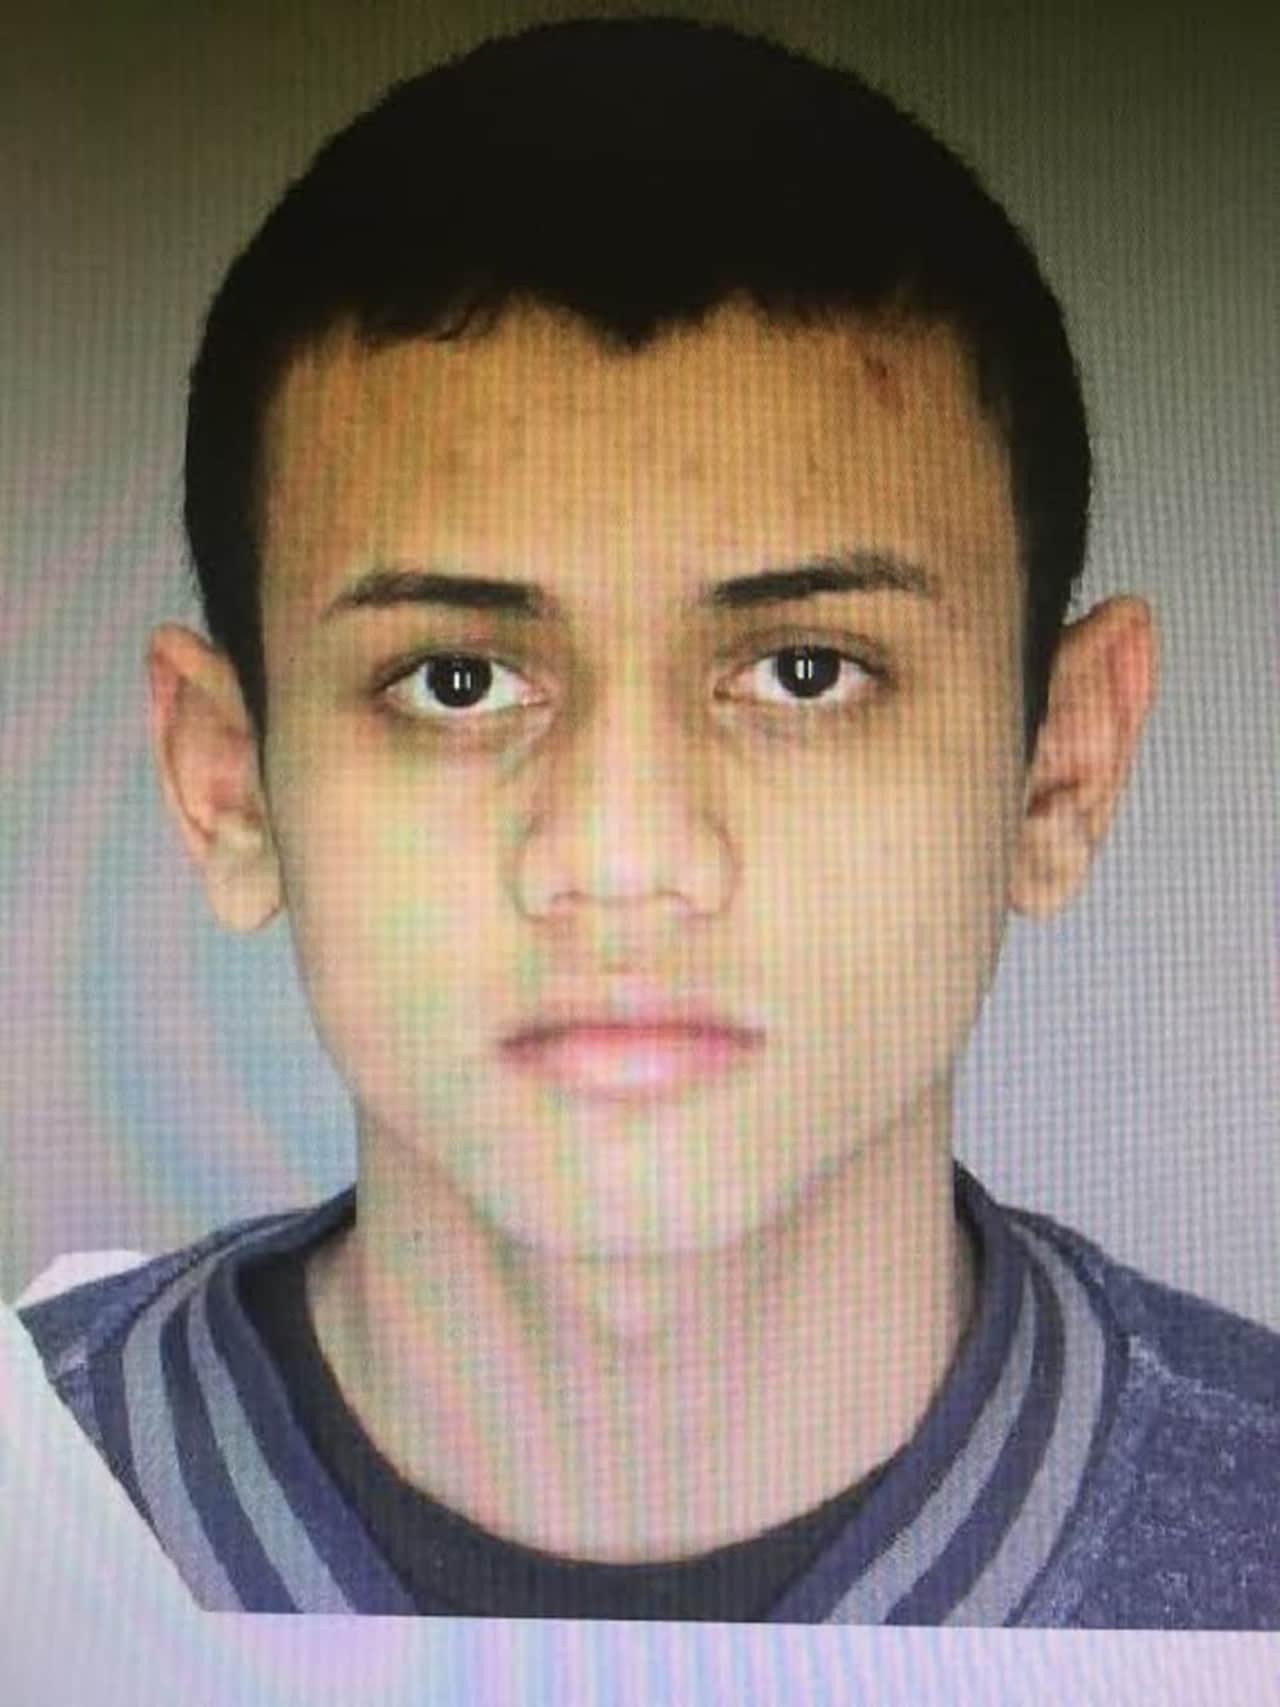 Carlos Martinez-Amaya, 16 of Suffern was charged with the armed robbery of a Suffern woman.